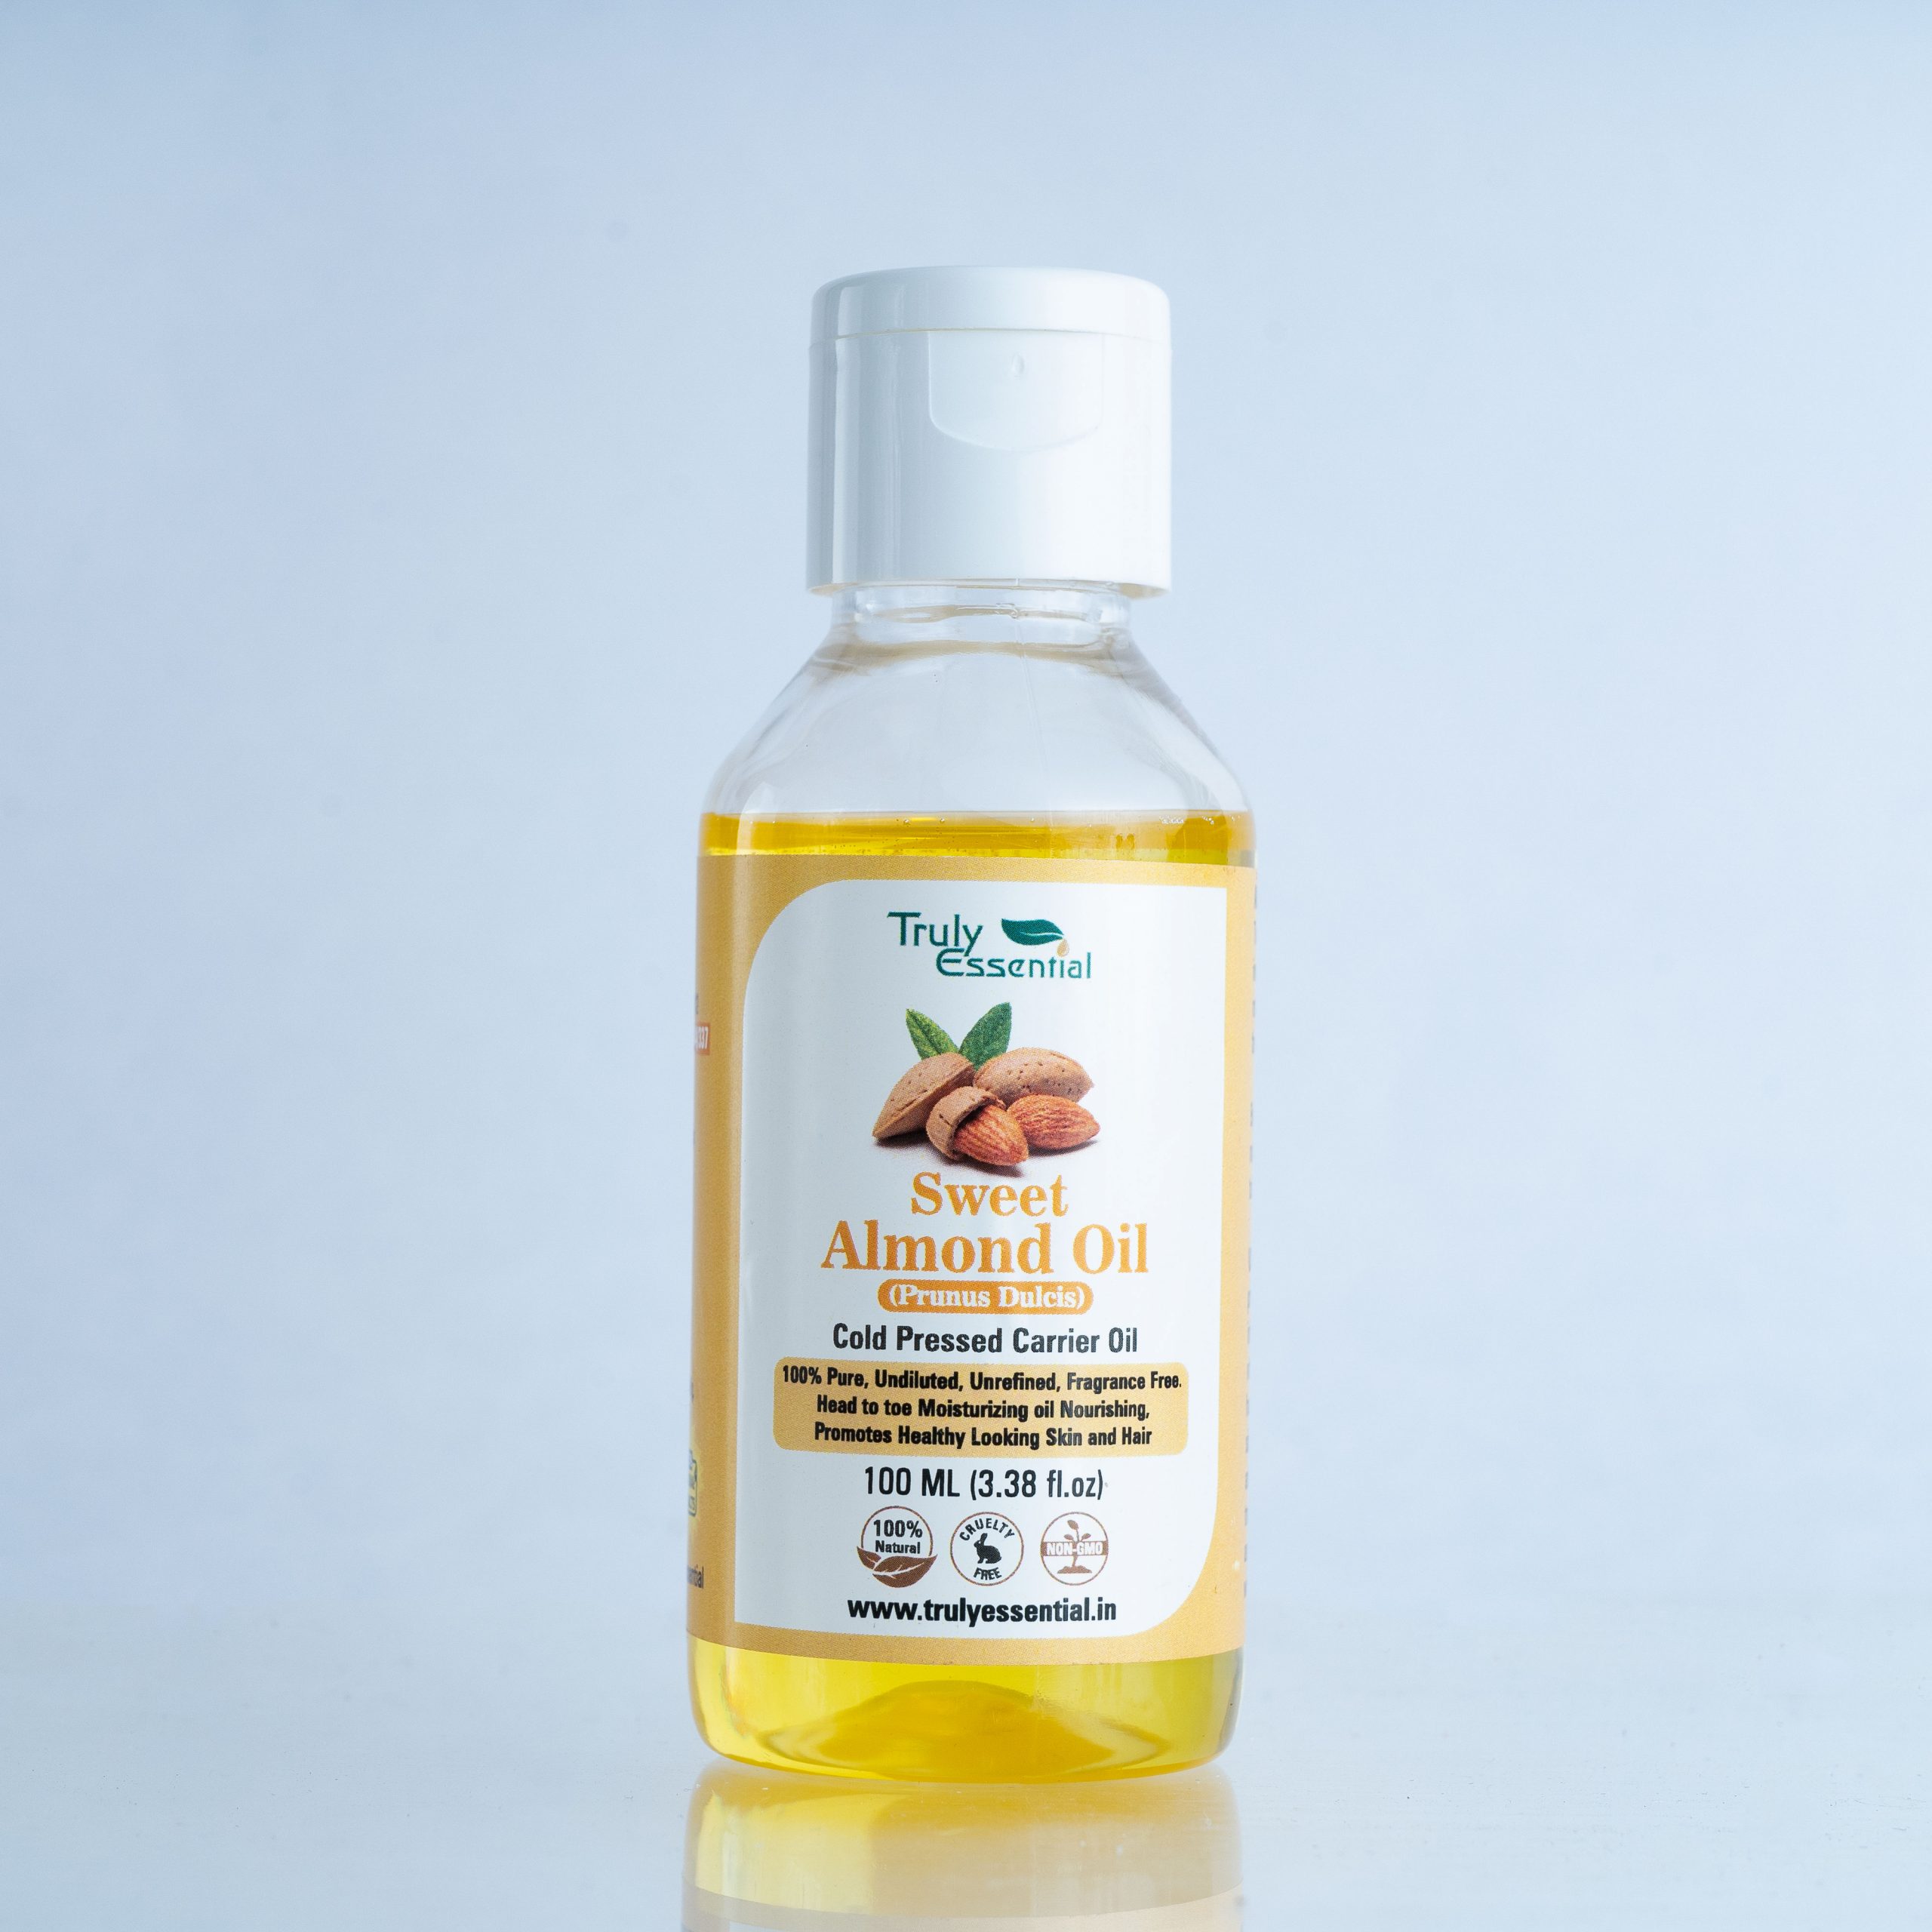 Buy Pure Almond Oil Online - Natural Pure Sweet Almond Oil